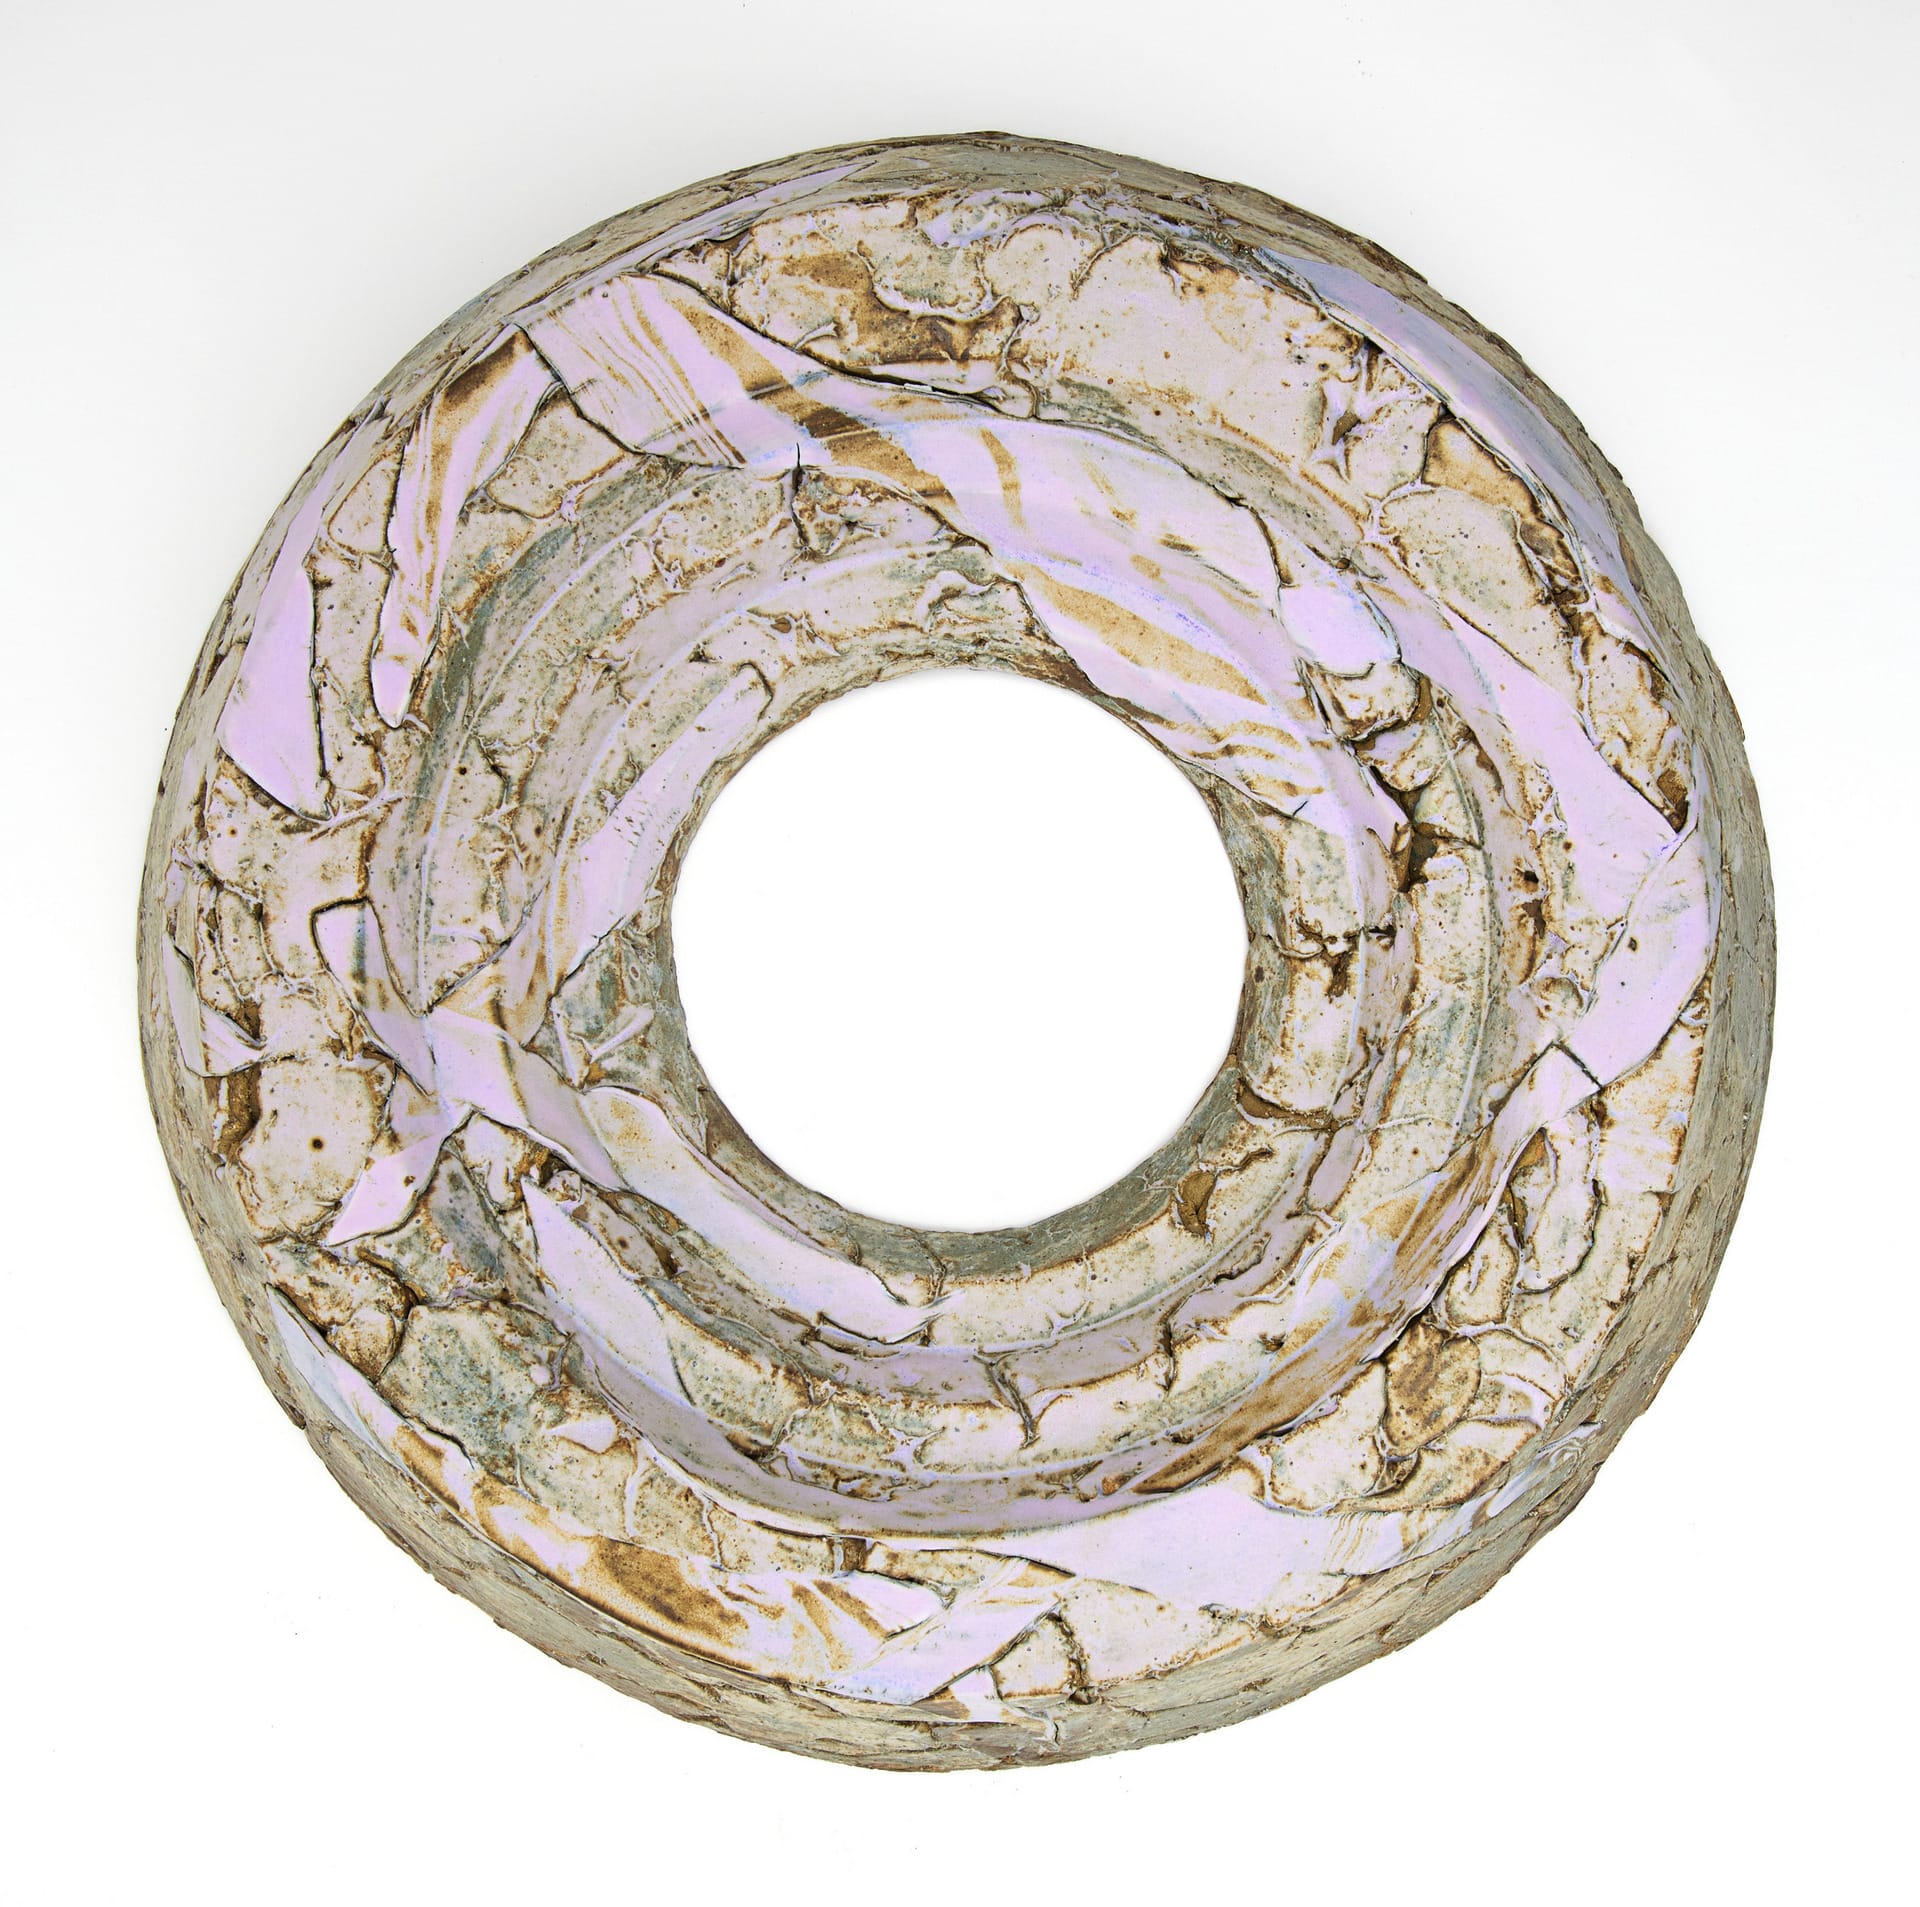 Organic Circular form in pastel pinks, purples and browns